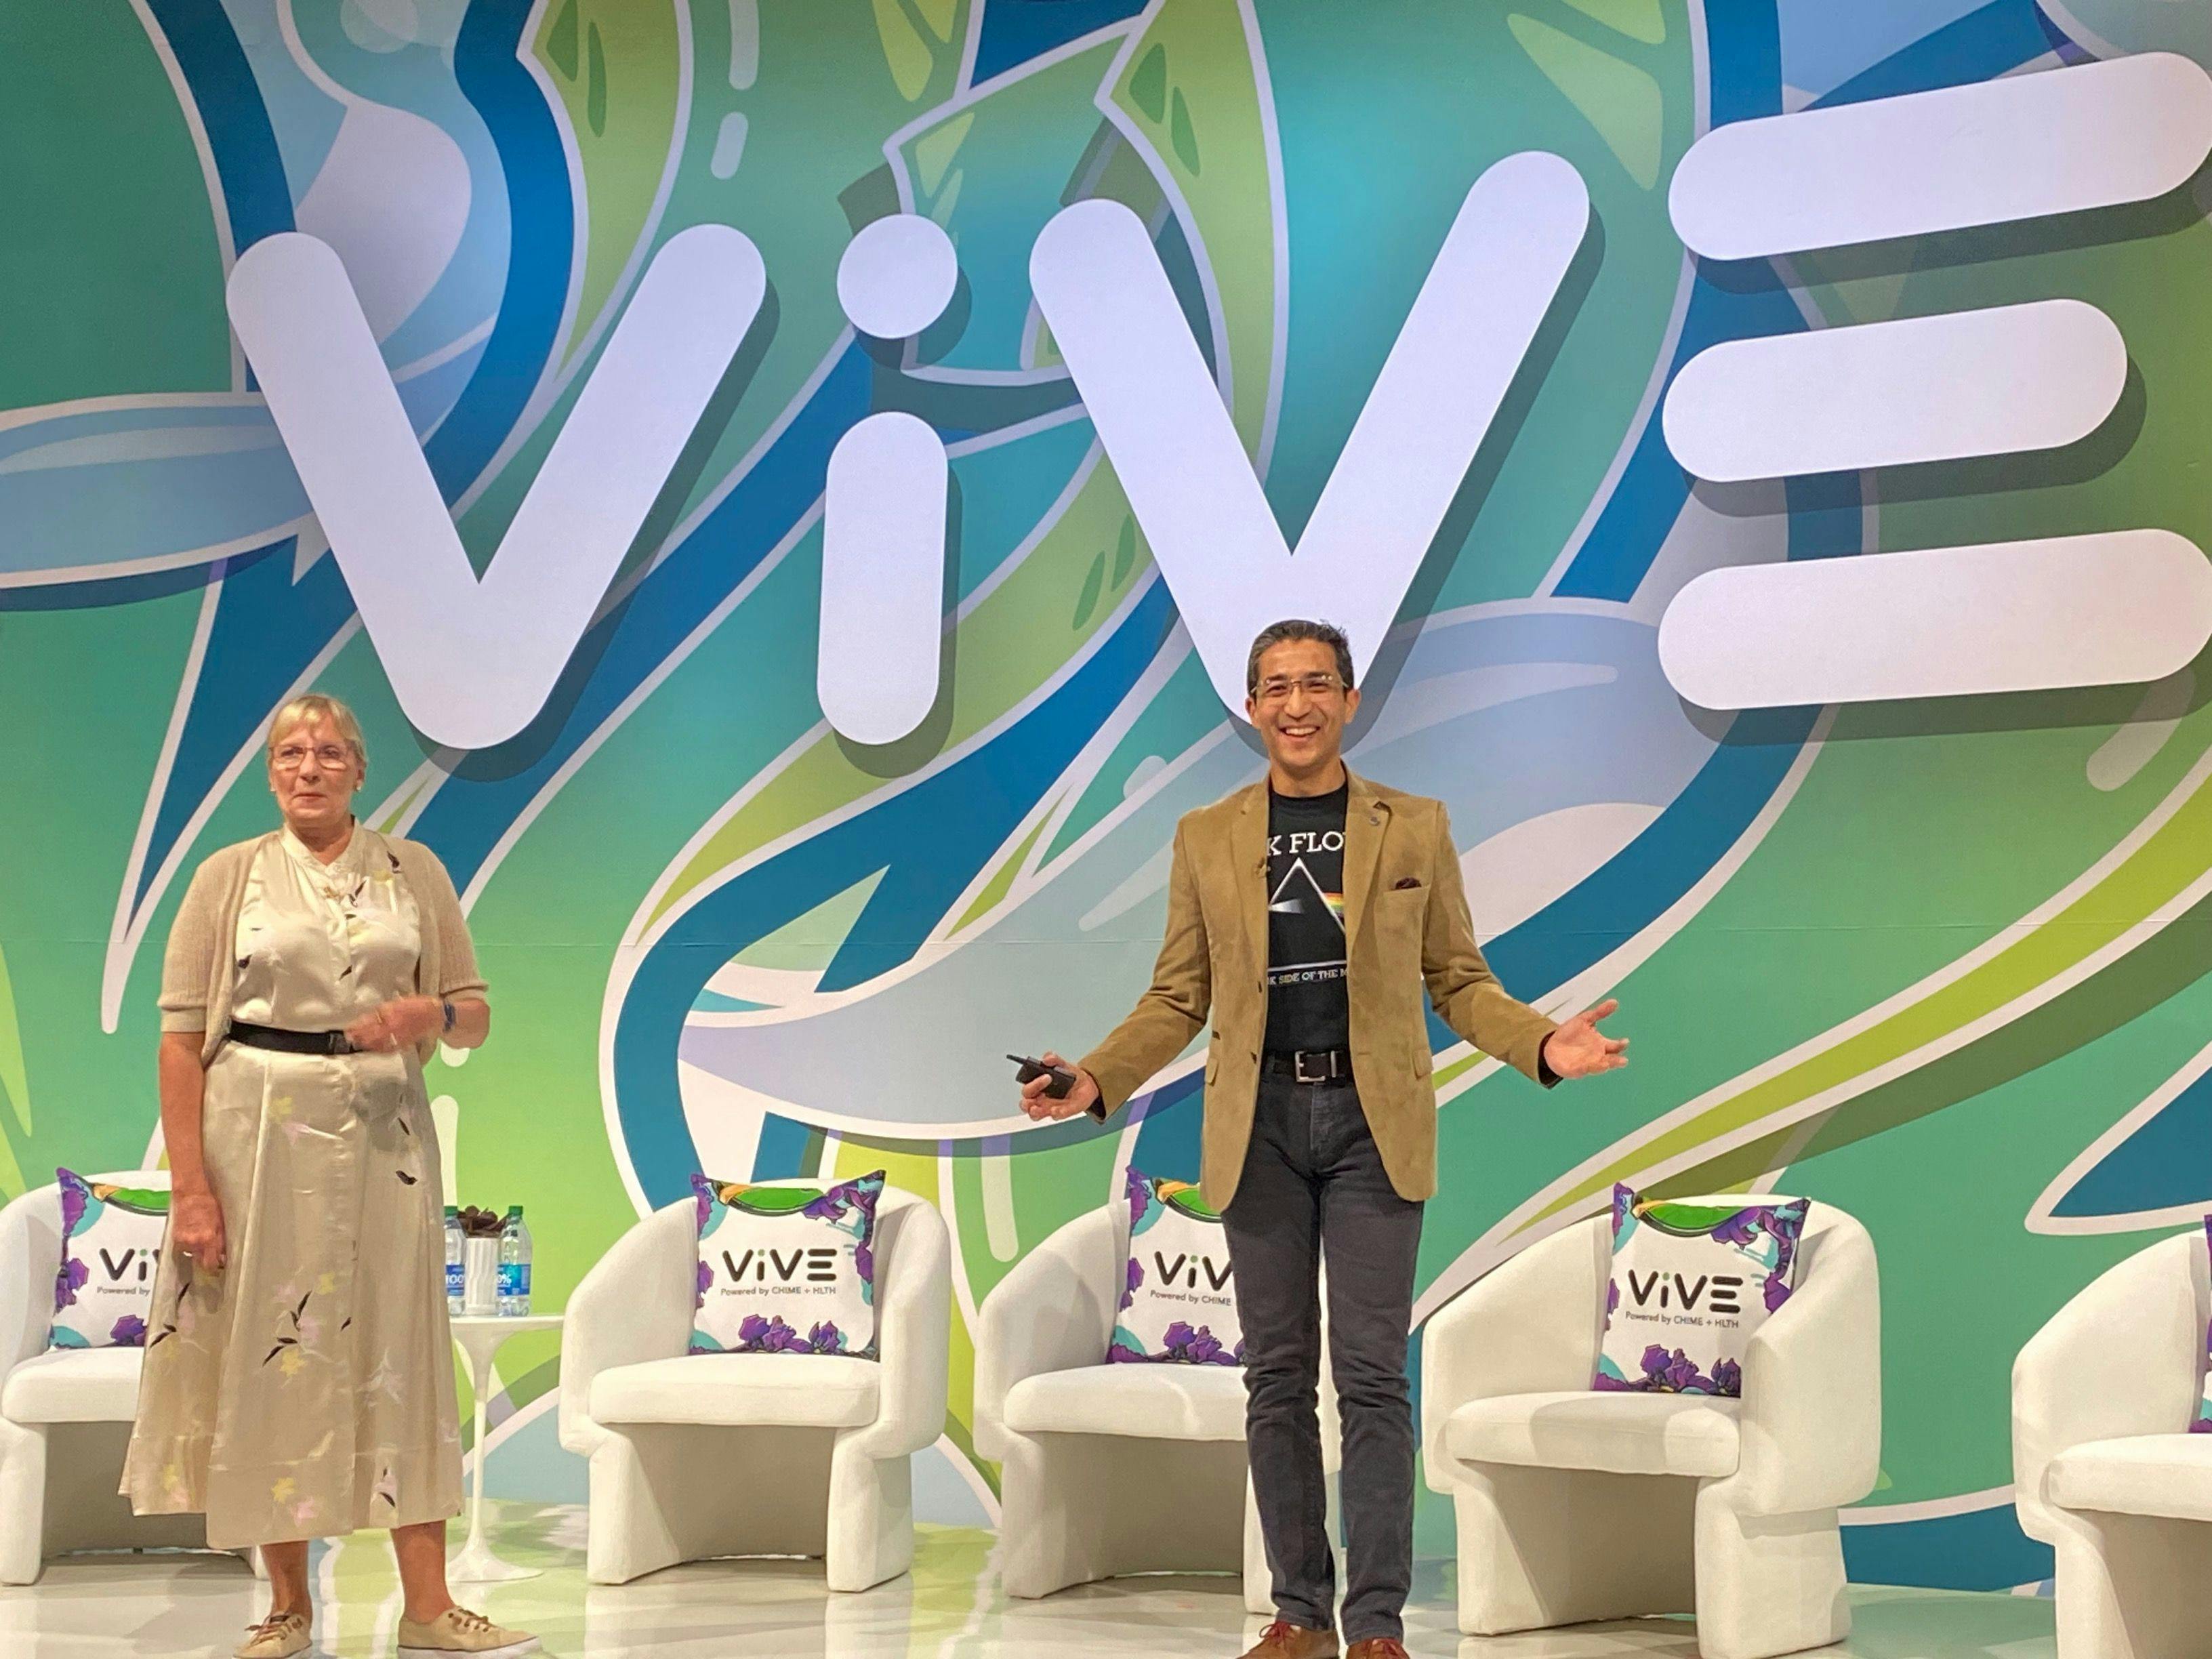 Deborah Di Sanzo, president of Best Buy Health, and Rasu Shrestha, chief innovation and commercialization officer for Advocate Health, speak at the ViVE Conference in Nashville.